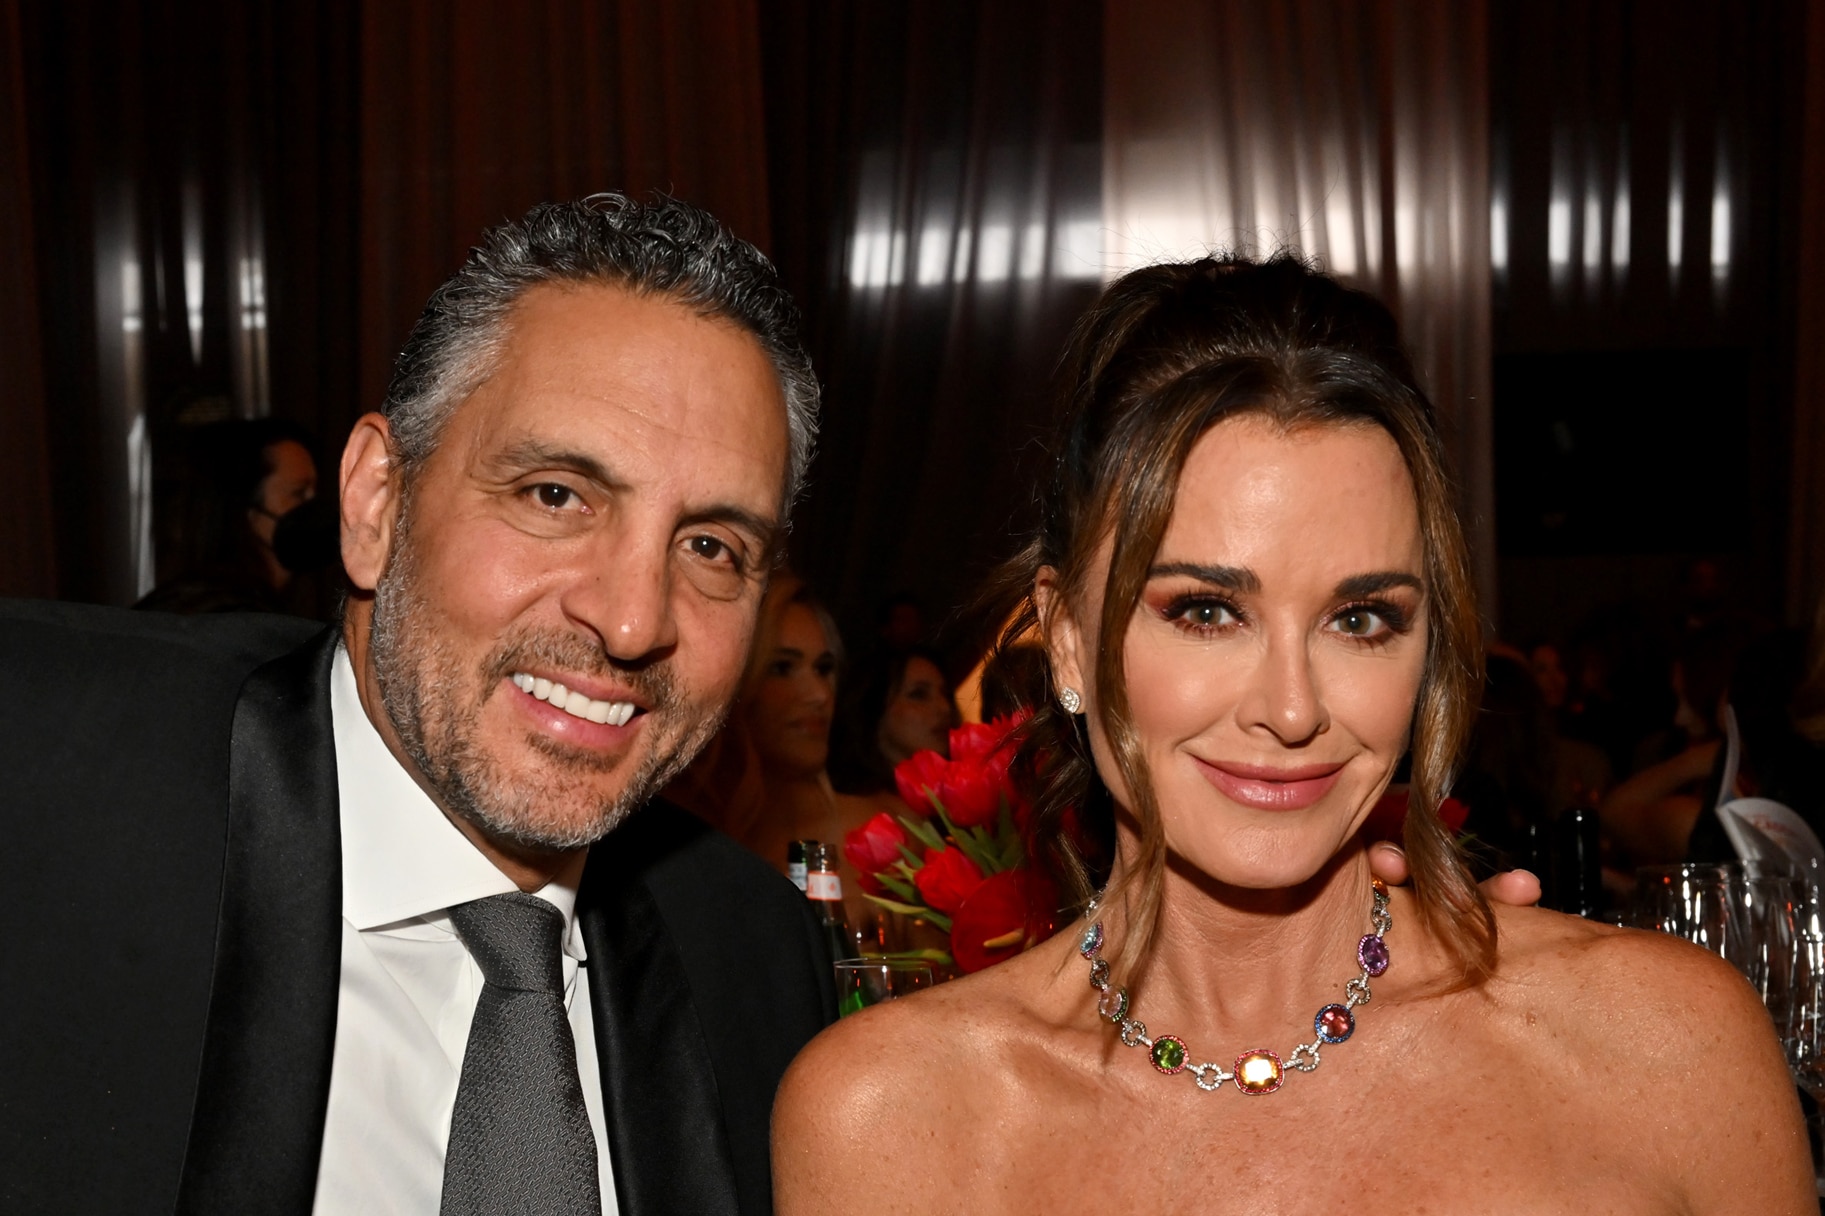 Kyle Richards Opens Up On Her Marriage To Mauricio Umansky The Daily Dish